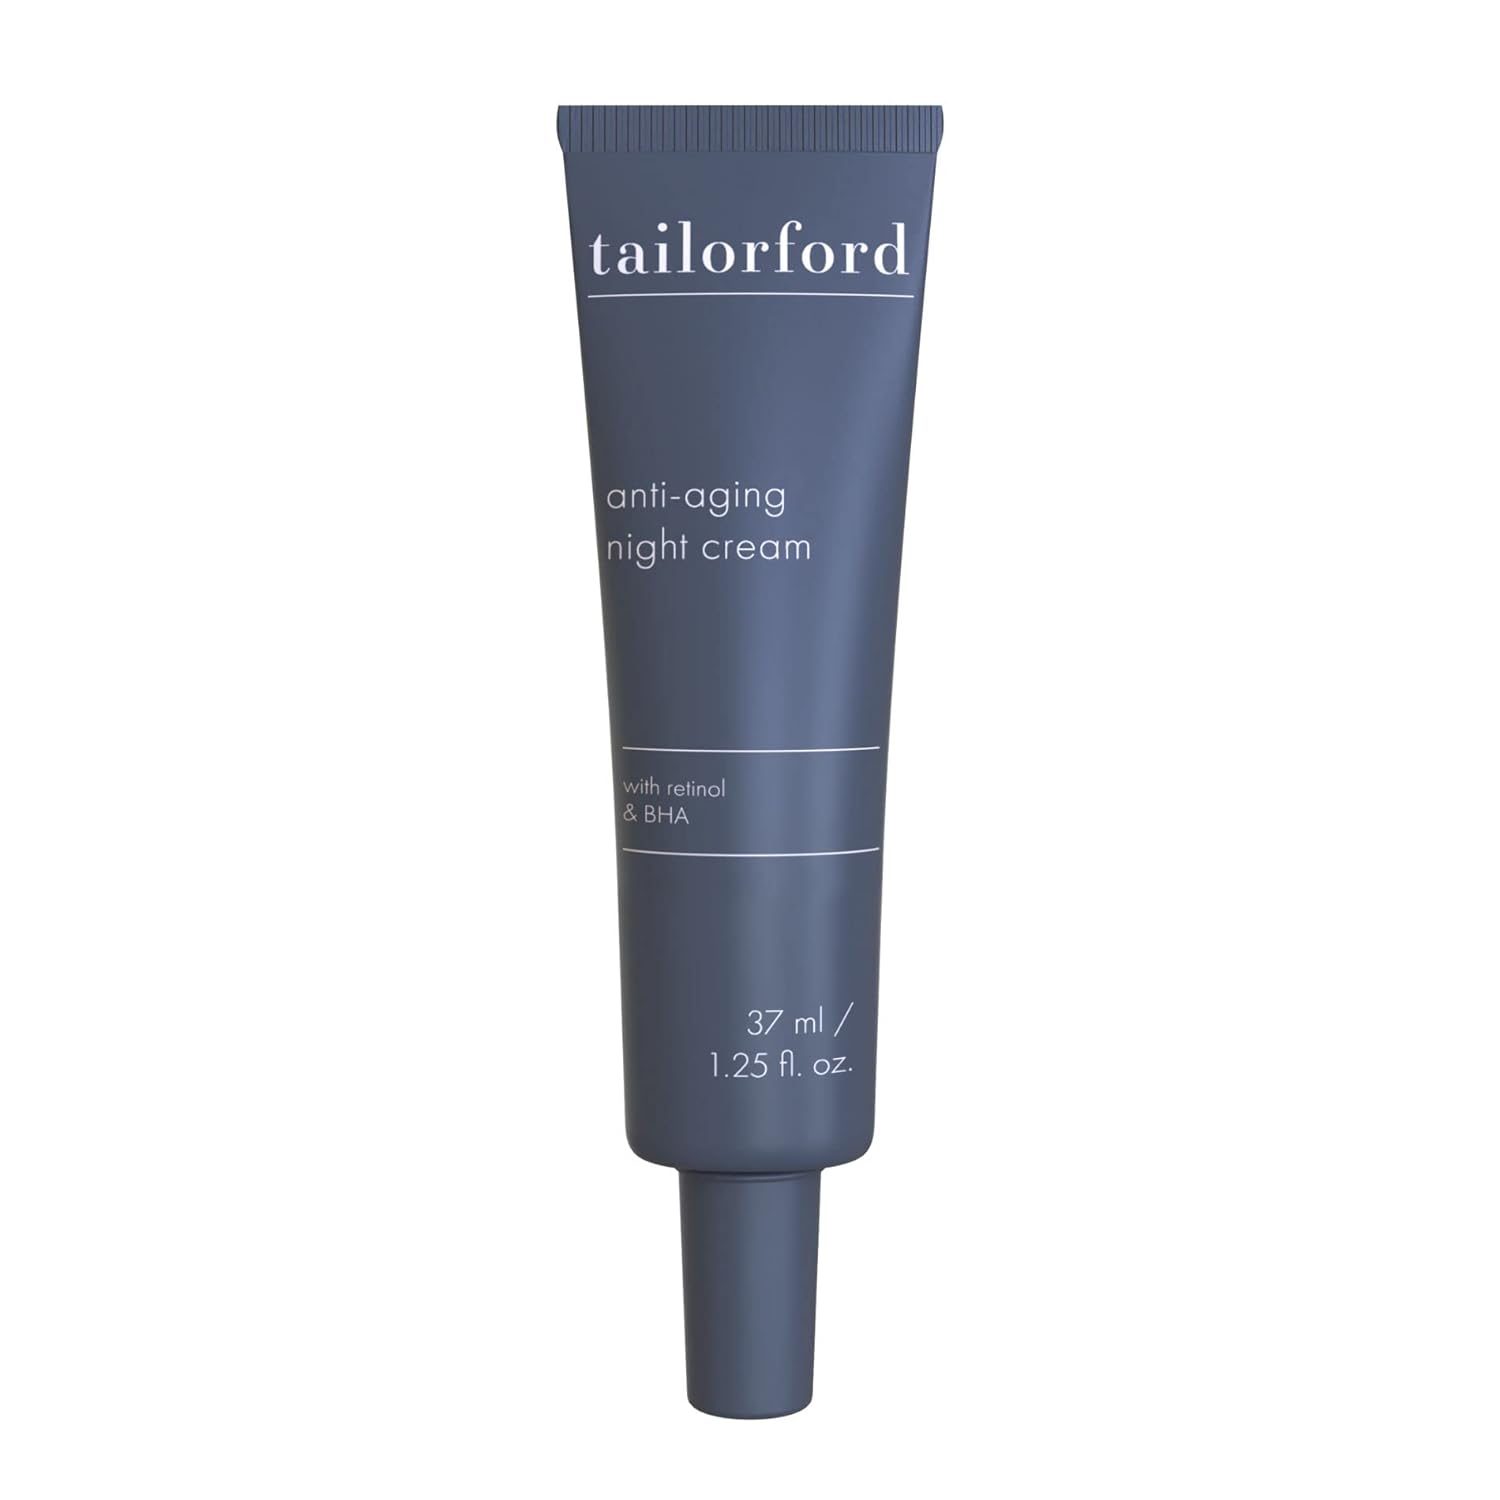 Tailorford Anti-Aging Night Cream for Face and Under Eye, Retinol & BHA Infused Serum to Help Reduce Wrinkles, Fine Lines and Dark Spots, 1.25